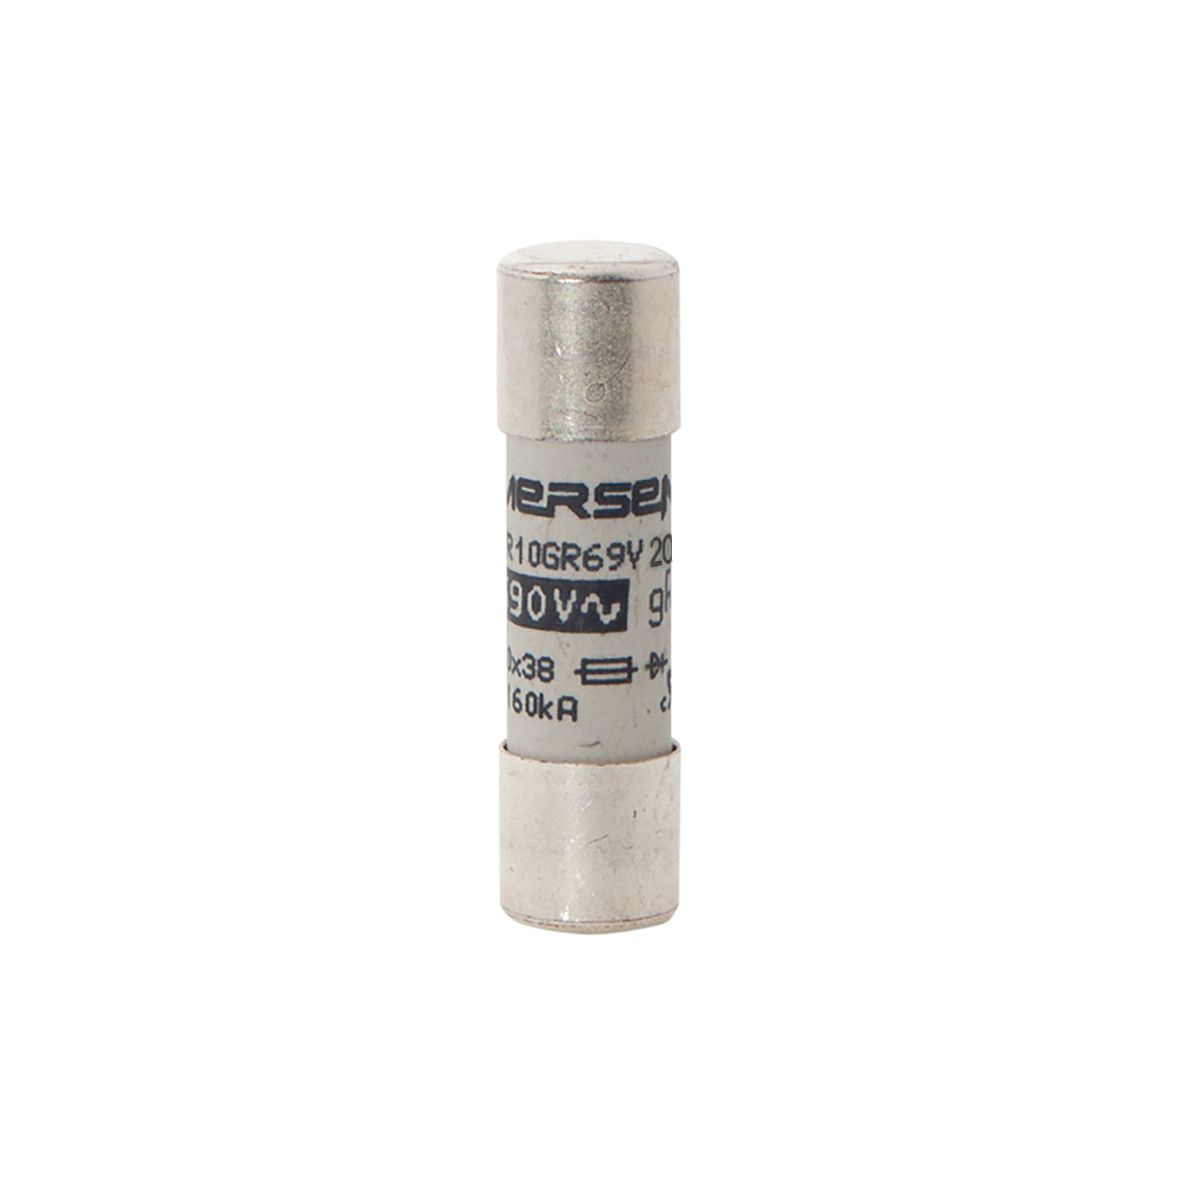 E1014580 - Cylindrical fuse-link gR 690VAC 10x38, 20A, without indicator